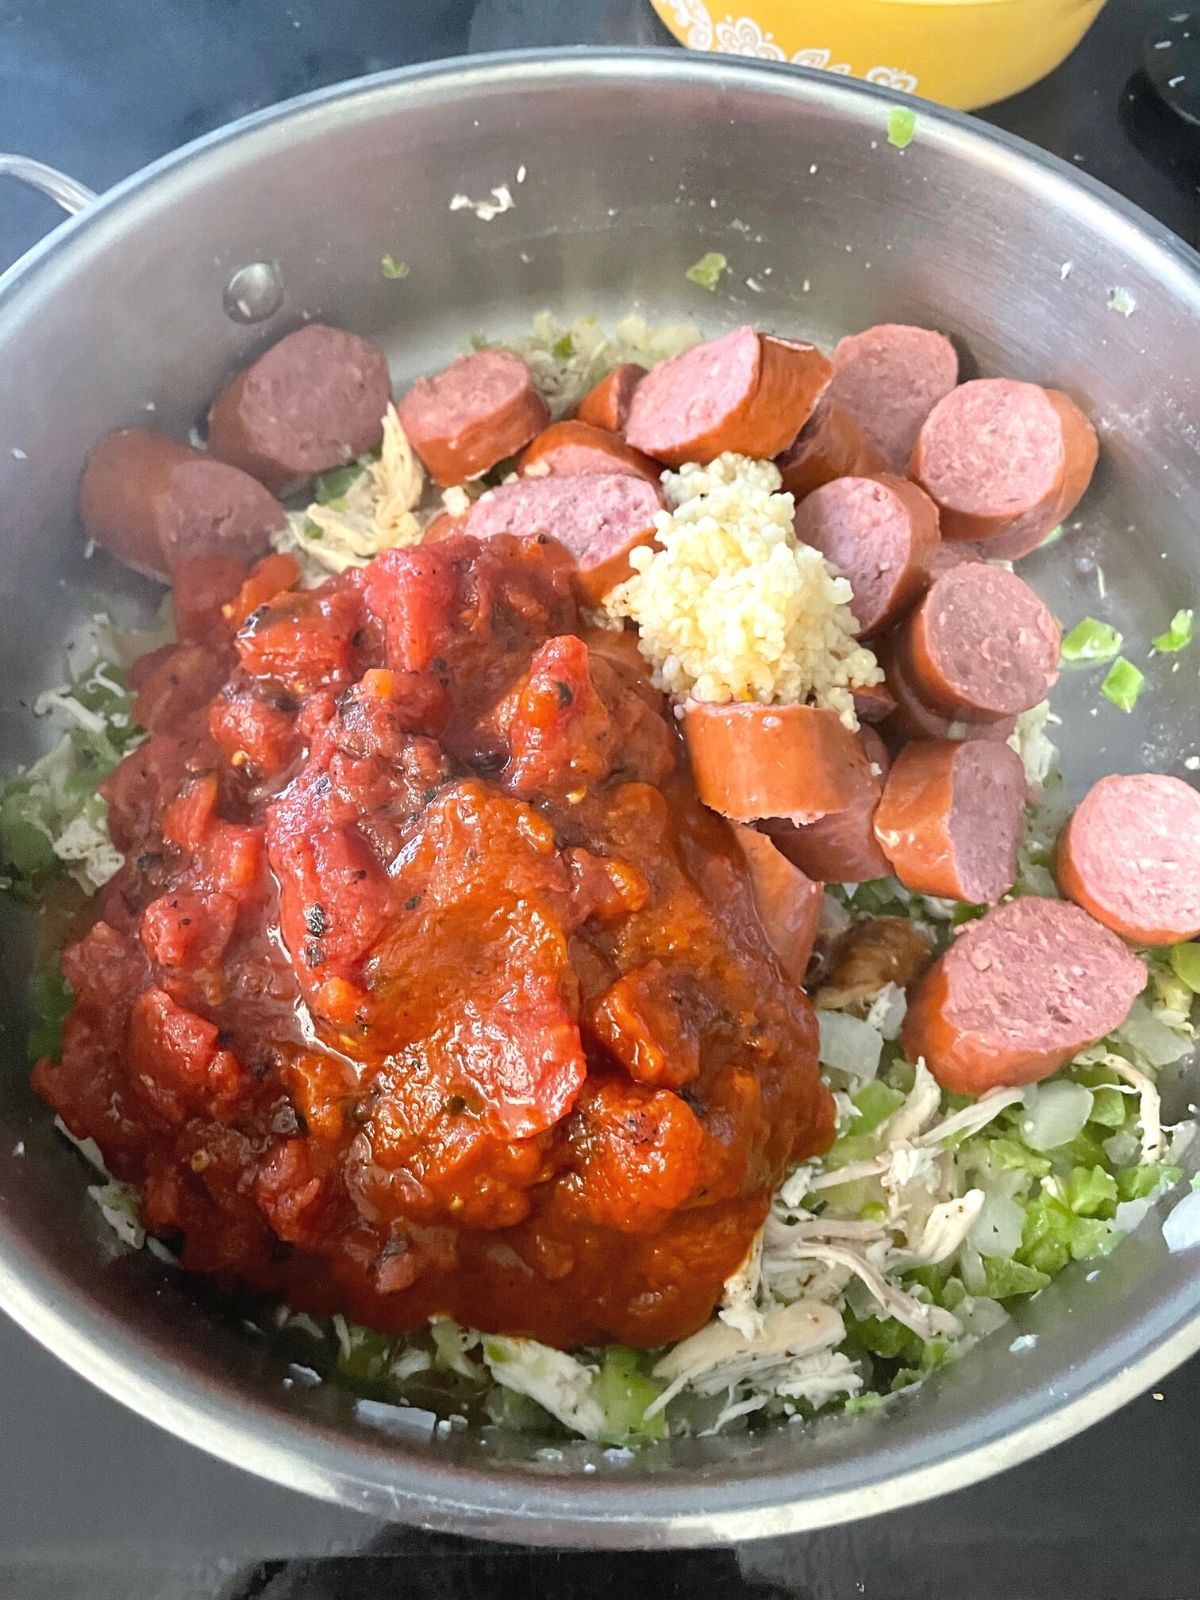 Sliced andouille sausage, crushed tomatoes and garlic added to a pan of cooked chicken and vegetables.